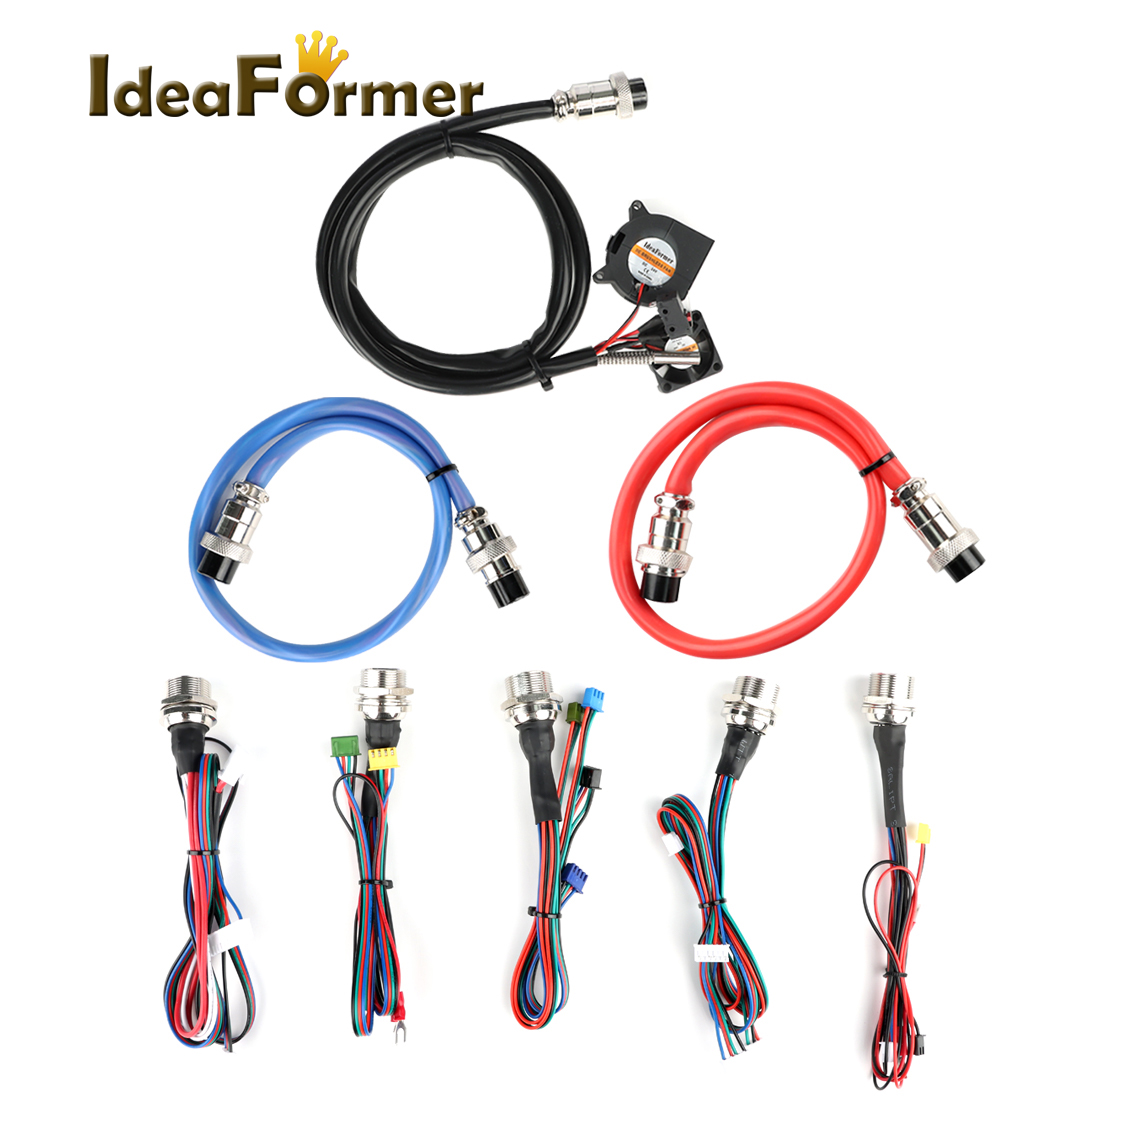 Ideaformer 3D Printer Accessories Connection Wire set 8pcs Power Cable Compatible 3D Printer Extension Cable, Durable Host Extension Cable Kits Type A/B/C/D/E/F/G/H 10pin/12pin/14pin Suitable for IR3&IR3 V1 Machine 3D Printer (Type E for IR3 V1 use only)